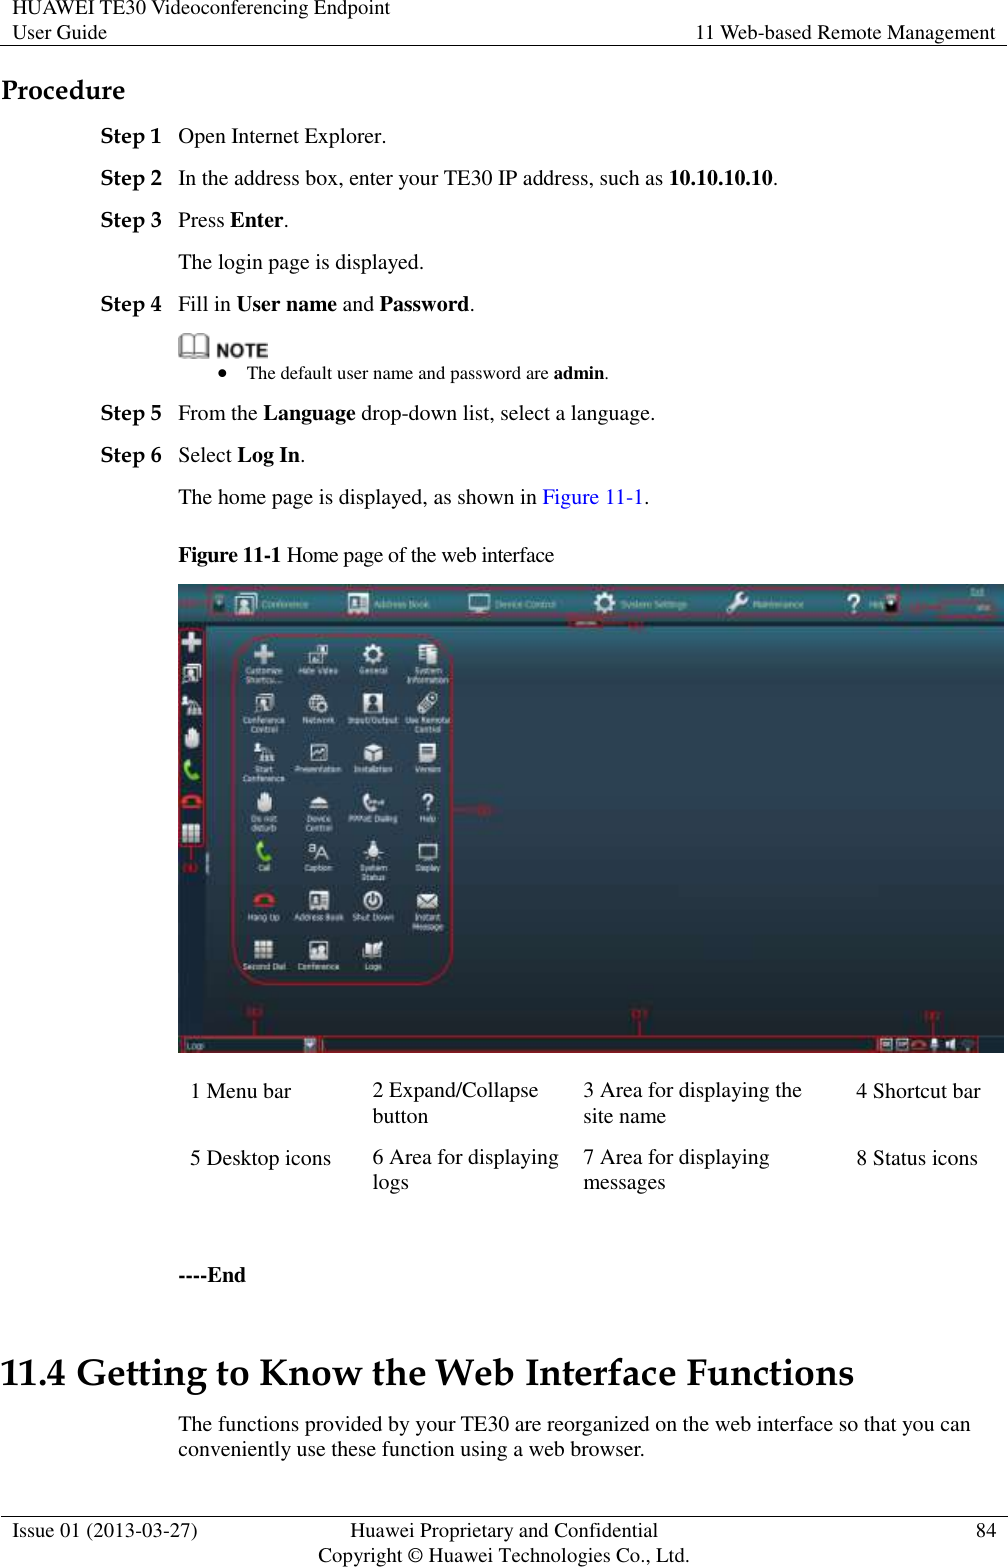 HUAWEI TE30 Videoconferencing Endpoint User Guide 11 Web-based Remote Management  Issue 01 (2013-03-27) Huawei Proprietary and Confidential                                     Copyright © Huawei Technologies Co., Ltd. 84  Procedure Step 1 Open Internet Explorer. Step 2 In the address box, enter your TE30 IP address, such as 10.10.10.10. Step 3 Press Enter. The login page is displayed. Step 4 Fill in User name and Password.   The default user name and password are admin. Step 5 From the Language drop-down list, select a language. Step 6 Select Log In. The home page is displayed, as shown in Figure 11-1. Figure 11-1 Home page of the web interface  1 Menu bar 2 Expand/Collapse button 3 Area for displaying the site name 4 Shortcut bar 5 Desktop icons 6 Area for displaying logs 7 Area for displaying messages 8 Status icons  ----End 11.4 Getting to Know the Web Interface Functions The functions provided by your TE30 are reorganized on the web interface so that you can conveniently use these function using a web browser.   